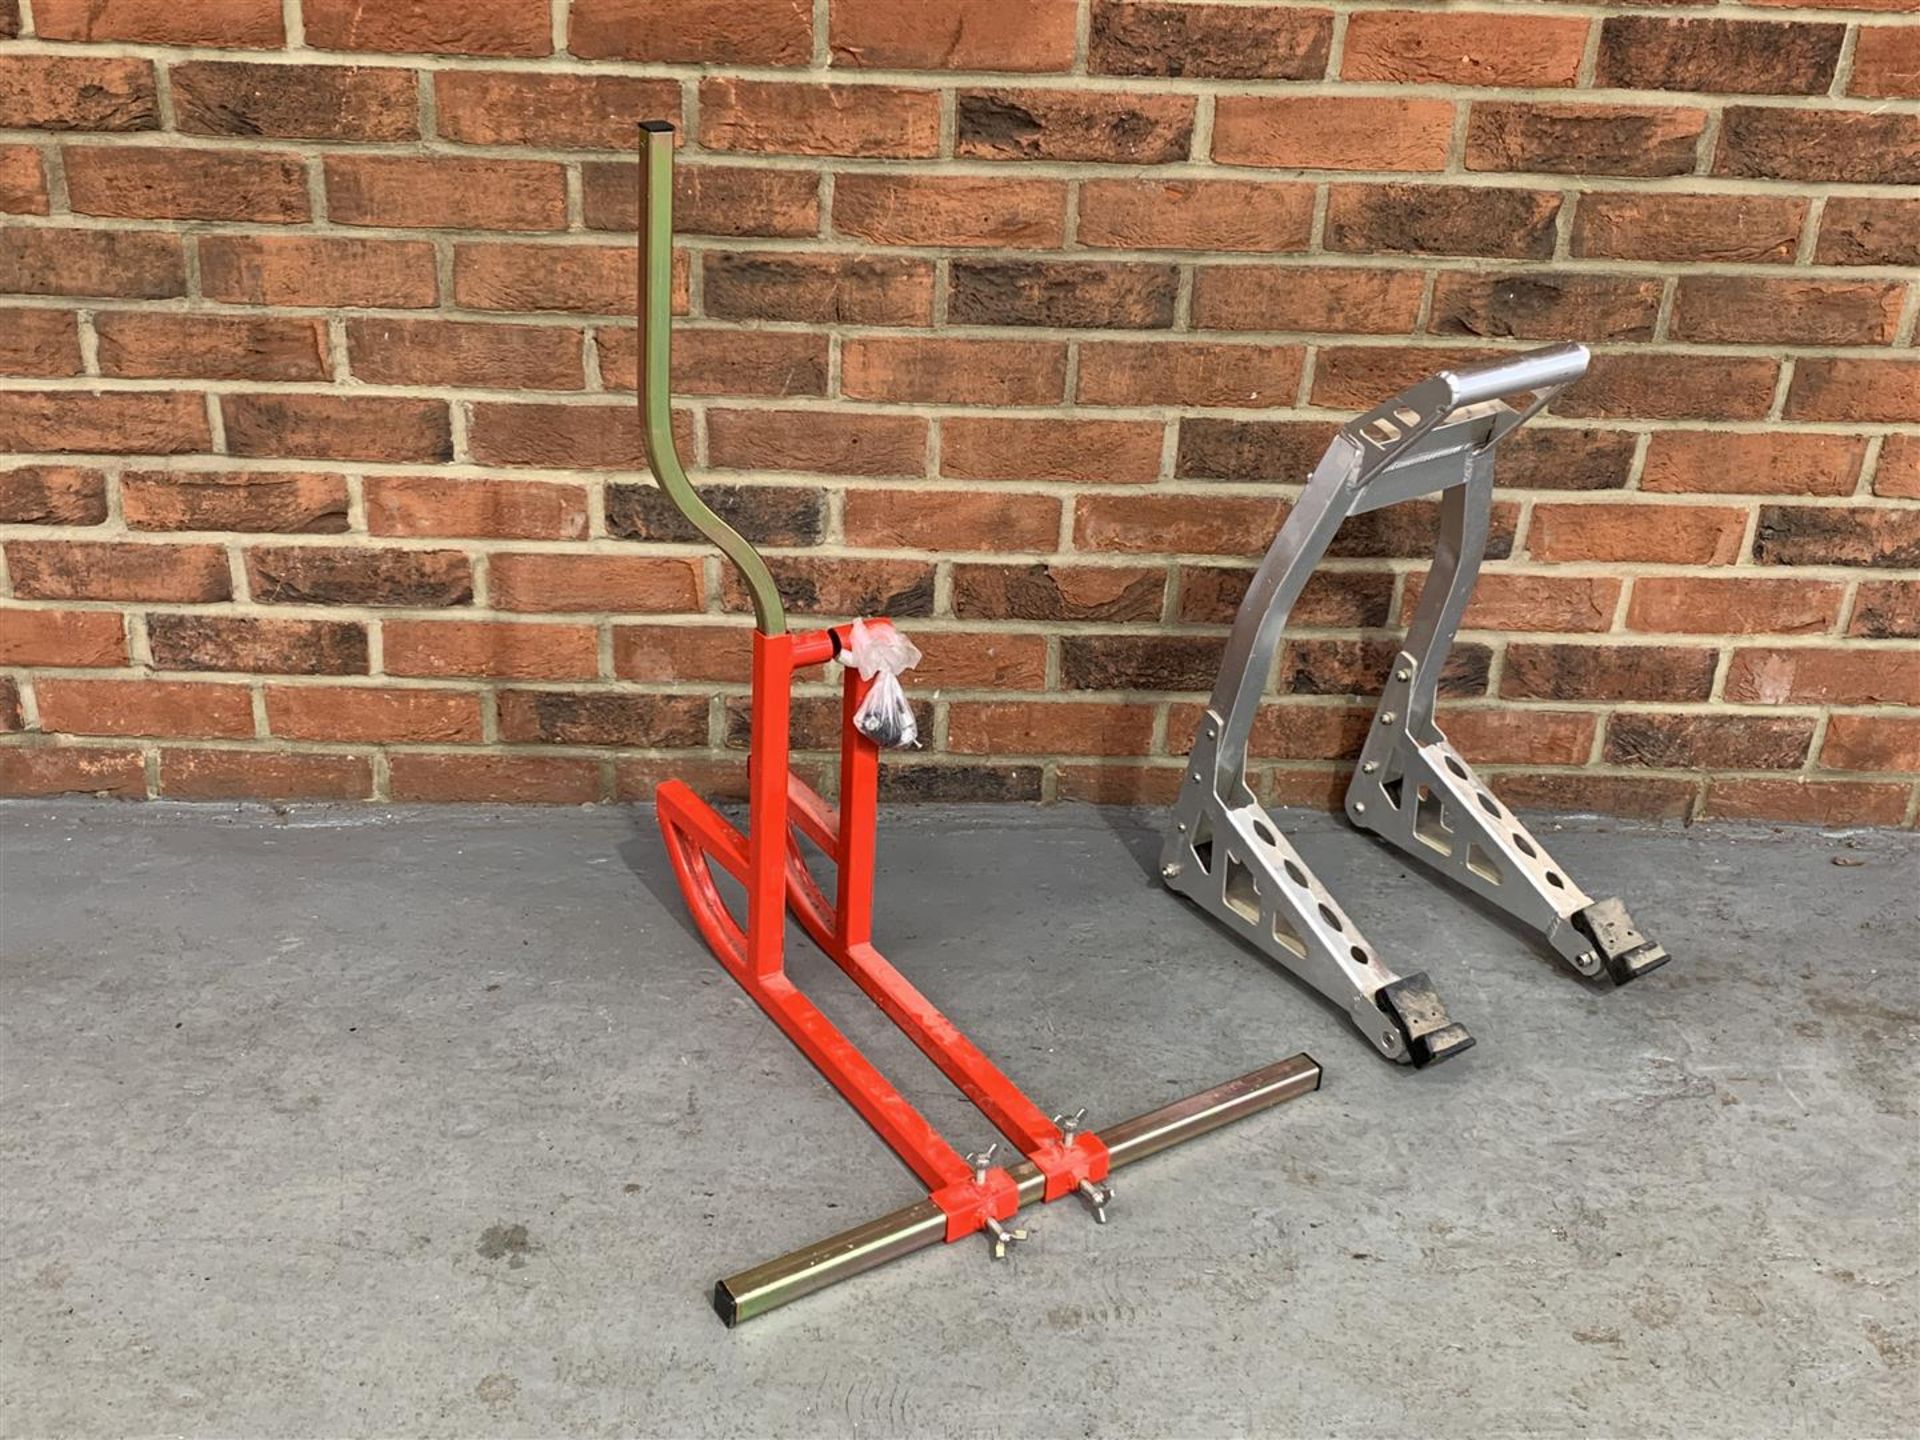 Two Motorcycle Paddock Stands